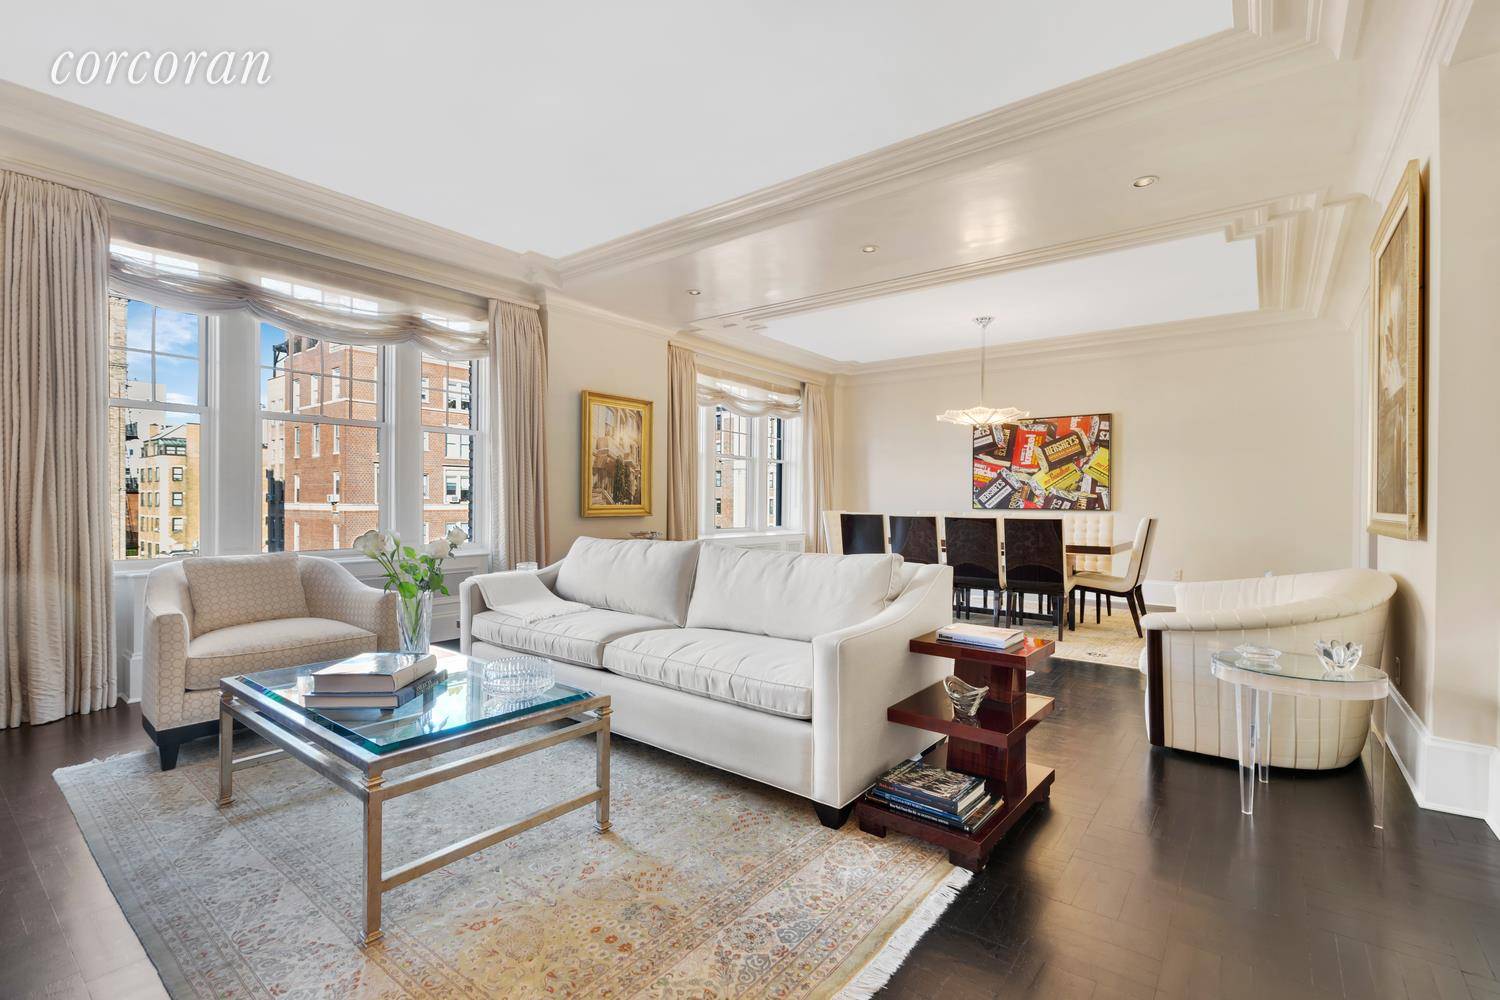 Wonderfully positioned high atop Park Avenue, this stunning Gold Coast original 8 into 6 room corner home showcases a gracious layout, fine finishes, grand scale with nearly 10 ceilings, and ...